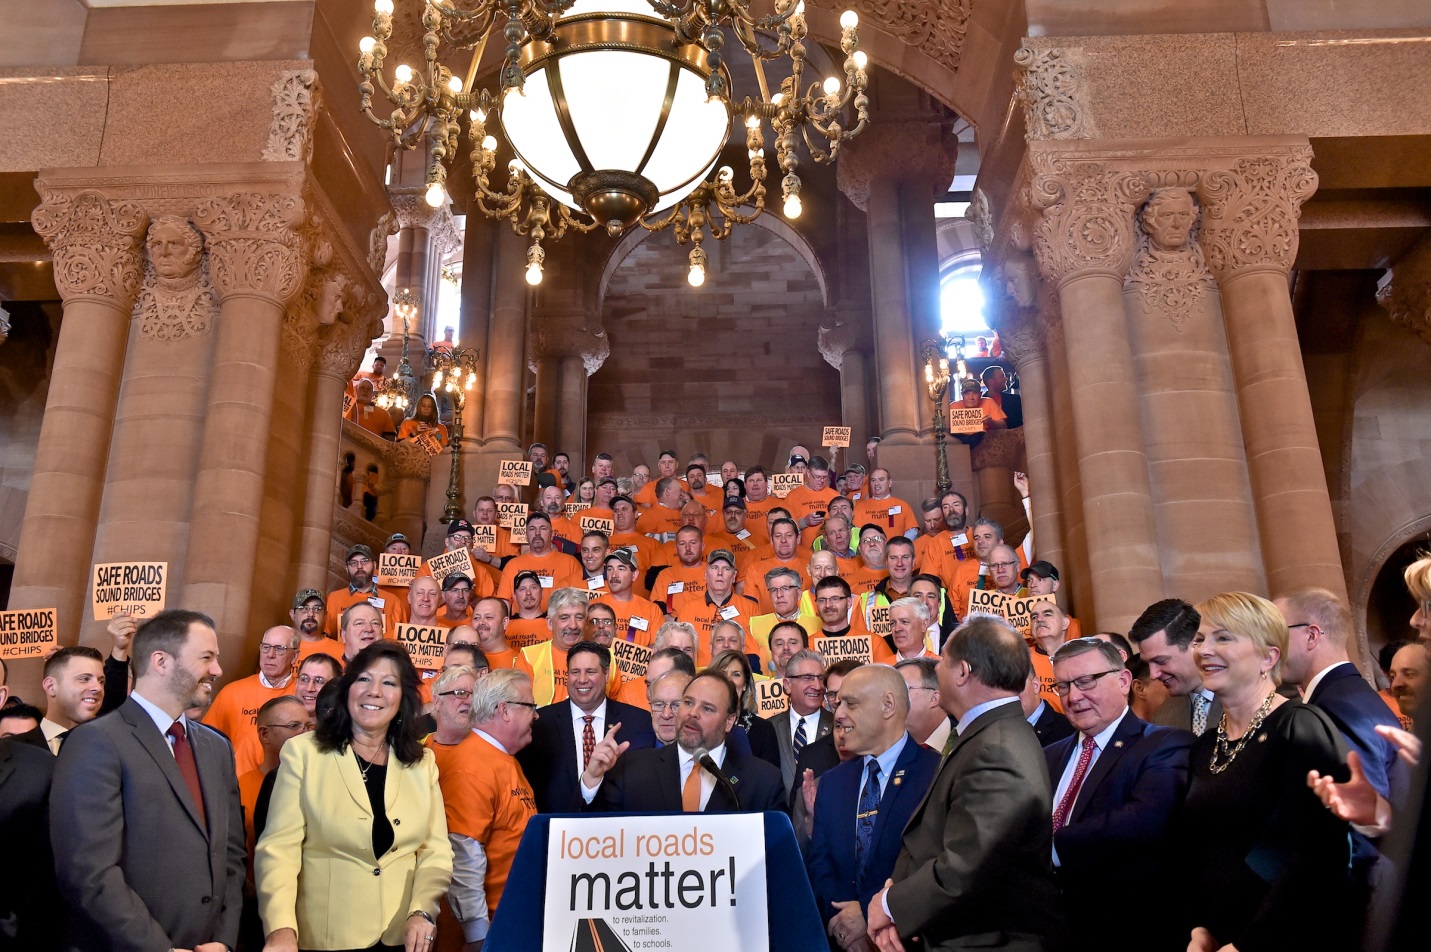 Assemblyman Brian Manktelow (R,C,I,Ref-Lyons) joined his Assembly and Senate colleagues along with hundreds of local highway workers, advocacy group representatives and local government officials for a rally calling for an increase to CHIPS funding on Wed